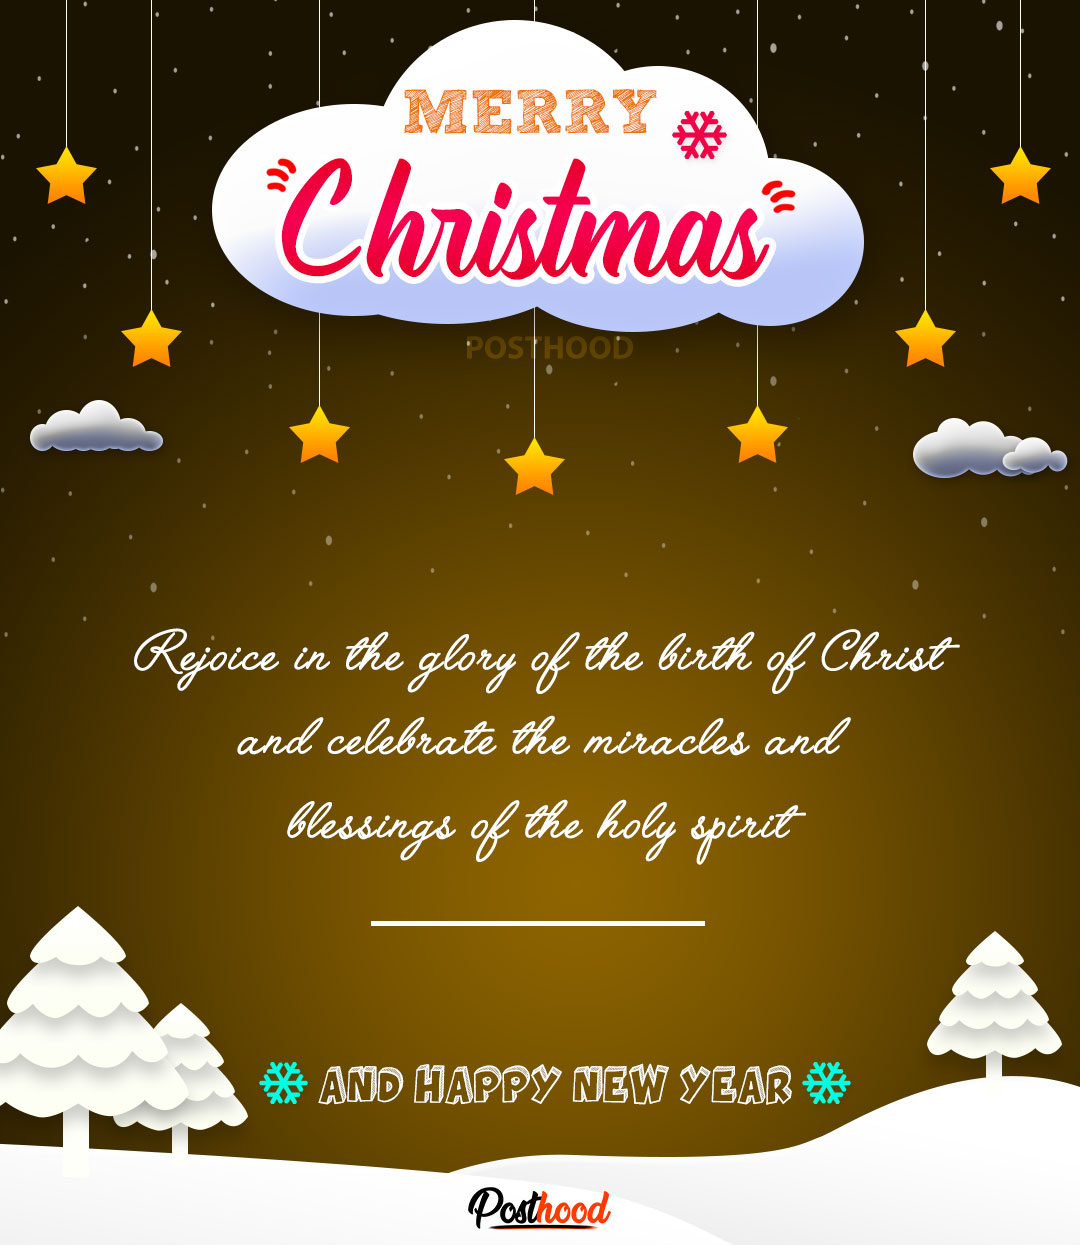 Here are 25 lovely and heartwarming Christmas wishes for your loved one and family. Wish them a very joyful Christmas and New Year 2020. 